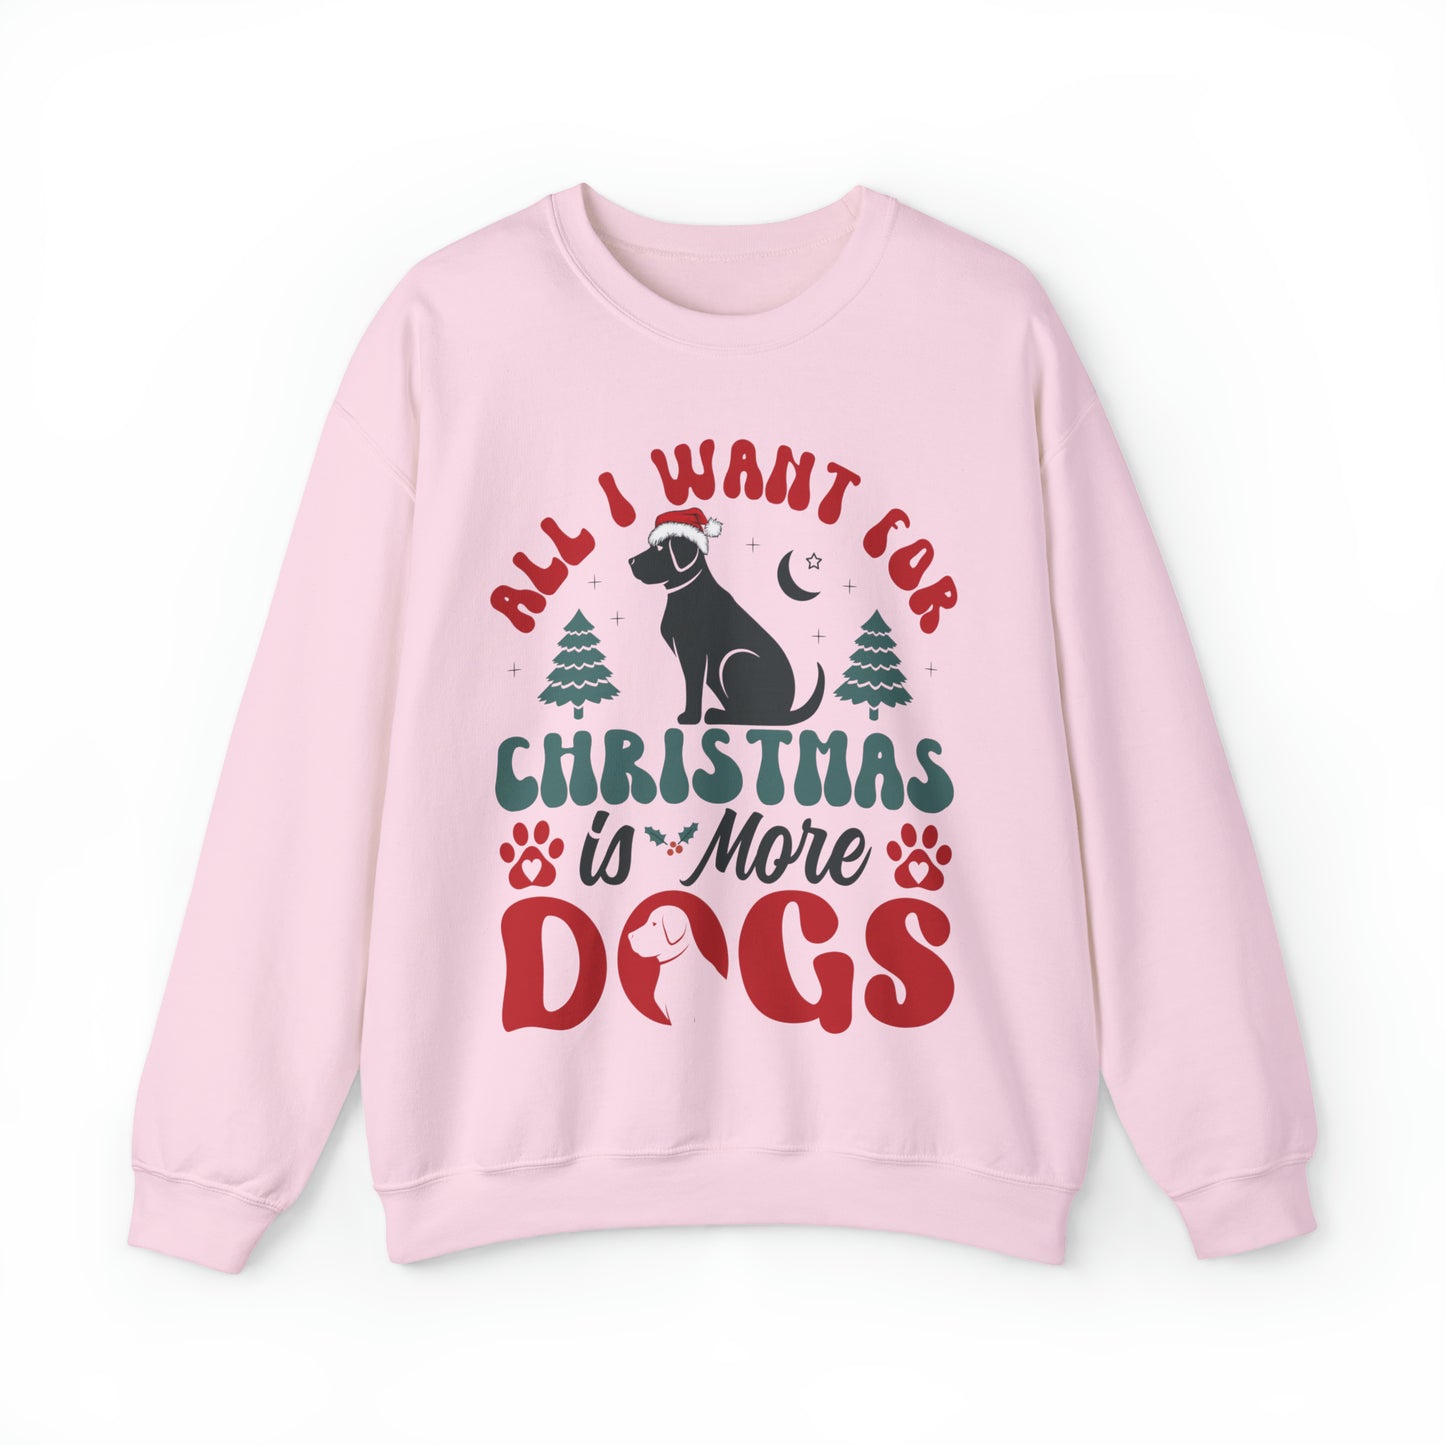 All I Want for Christmas is More Dogs Funny Adult Christmas Unisex Sweatshirt